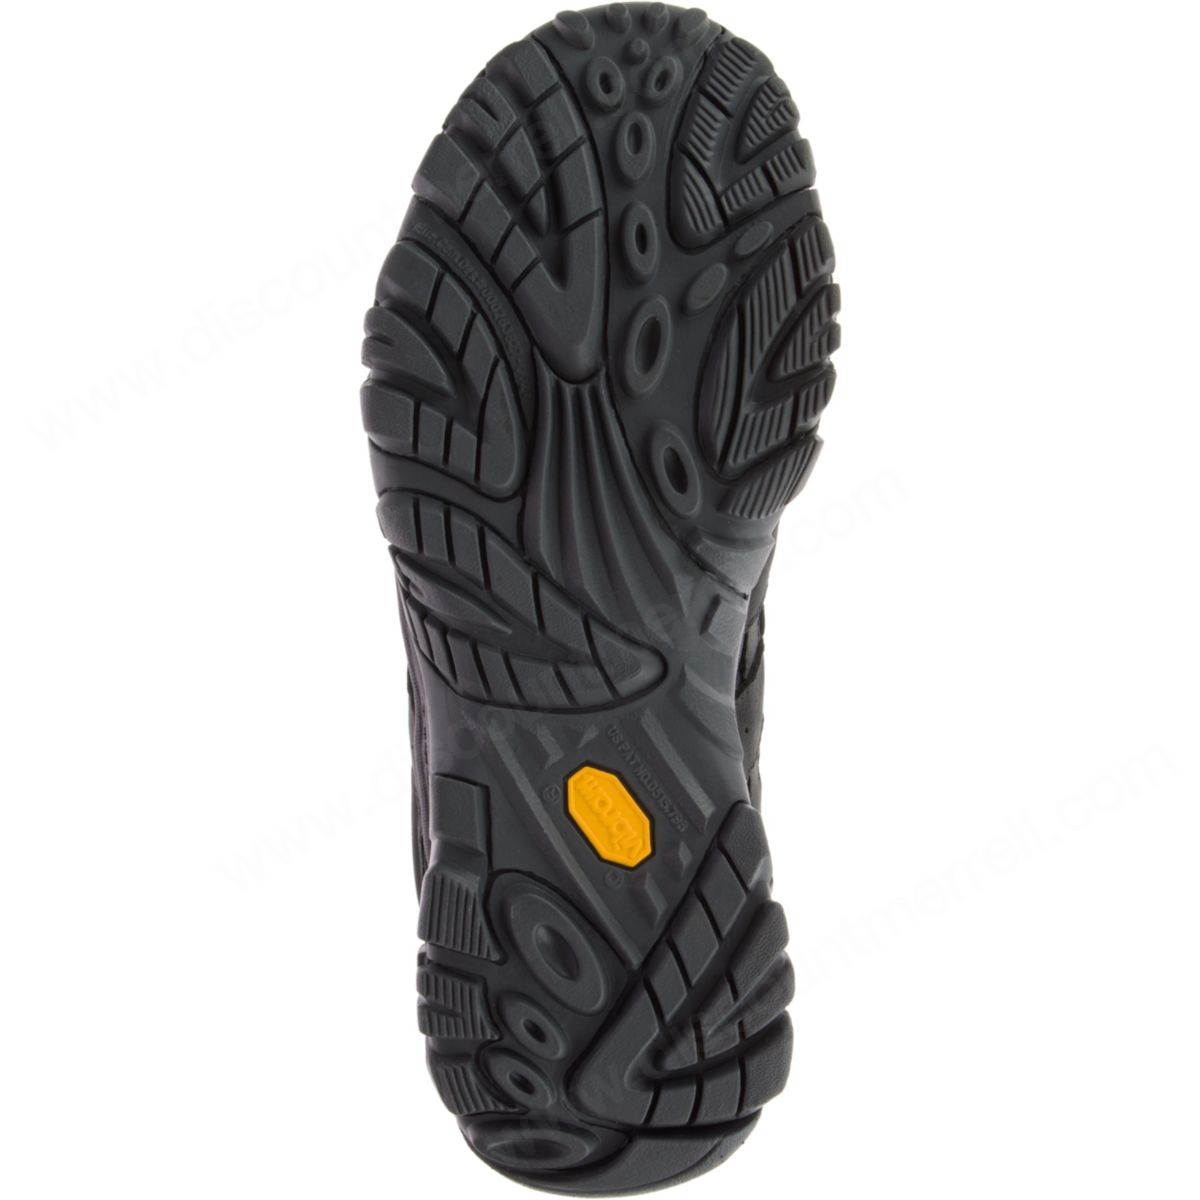 Merrell Man's Moab Mother Of All Boots™ Smooth Black - -1